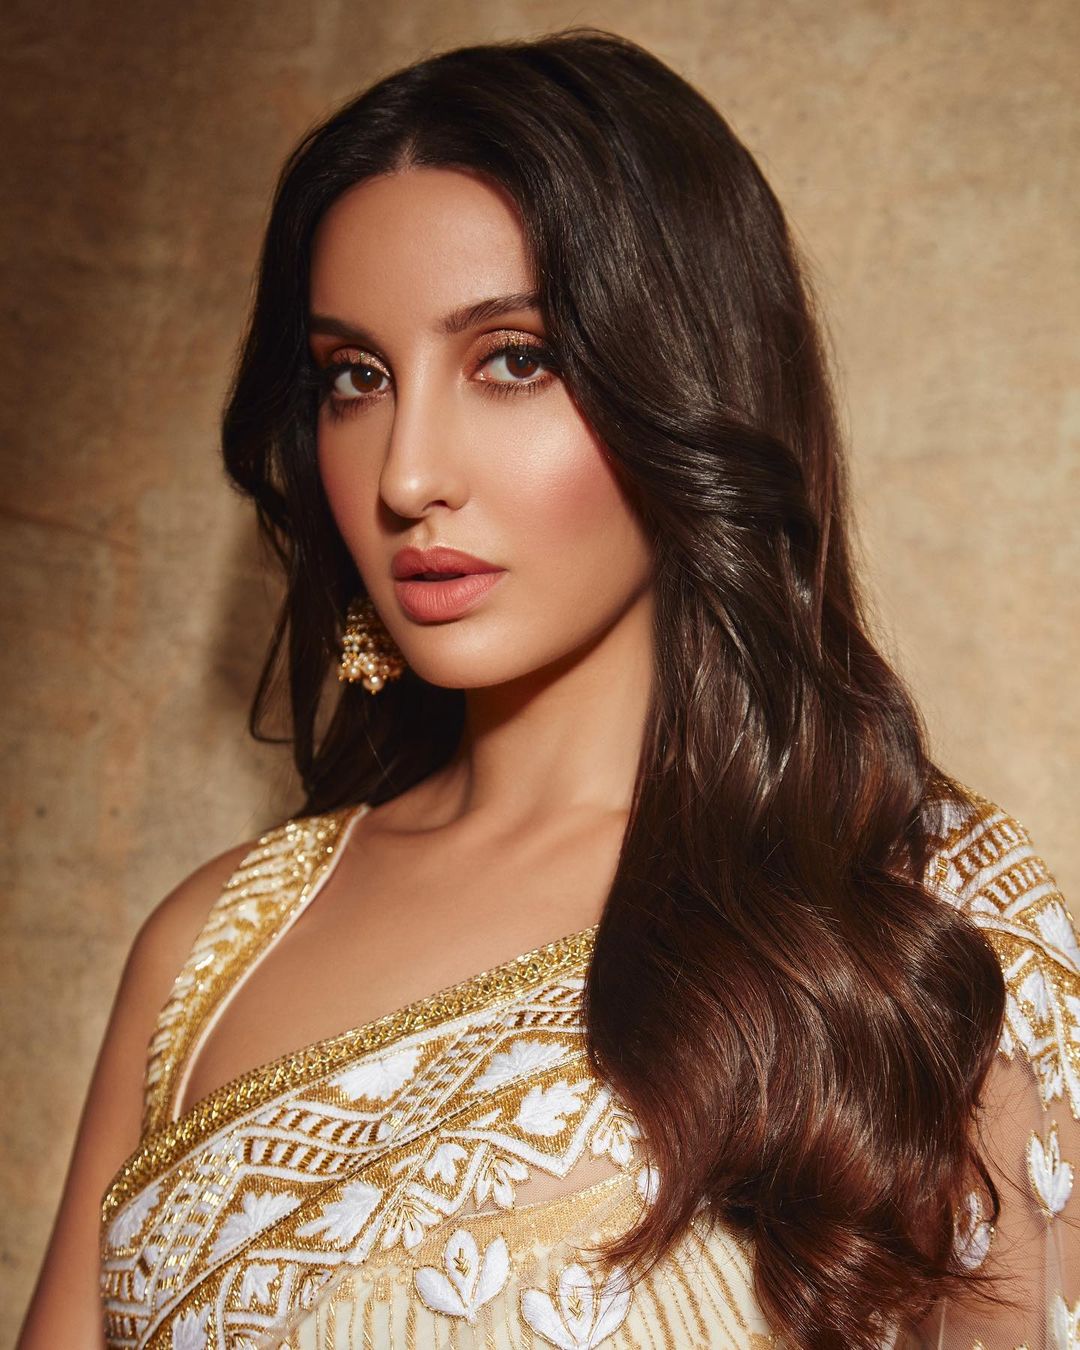 Nora Fatehi in white and golden saree with jhumka earrings - beautiful indian girl instagram photos